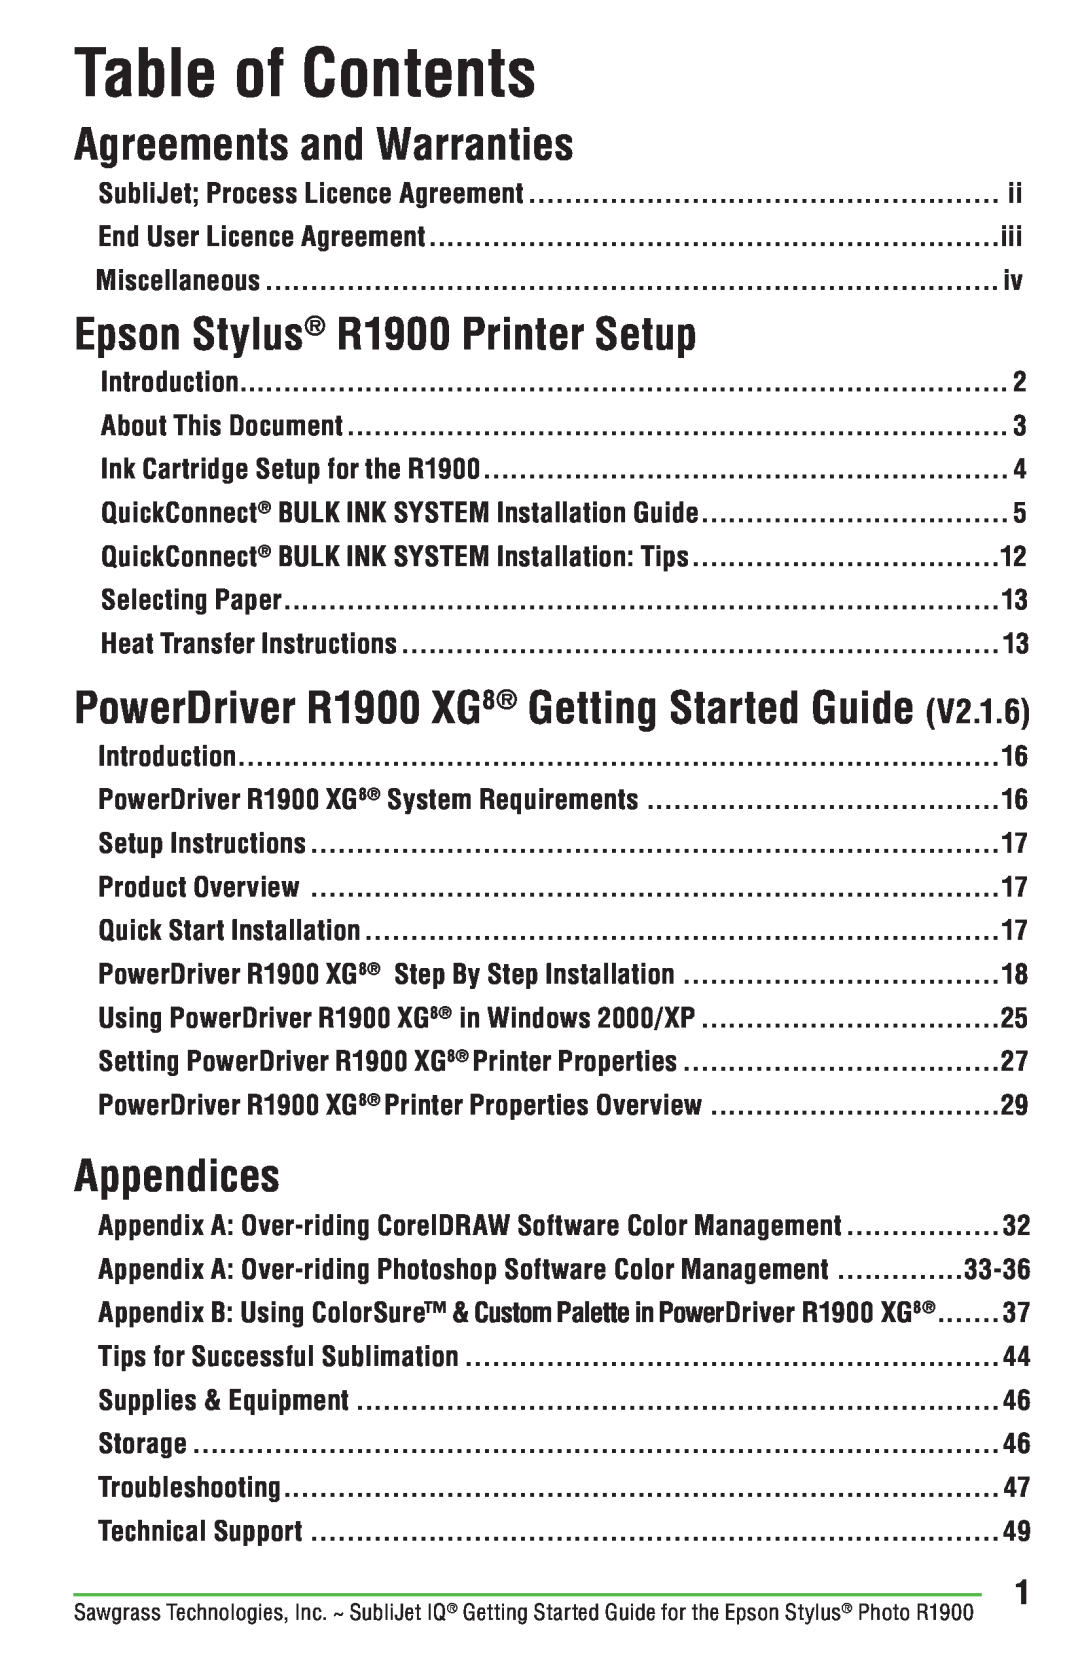 Epson Table of Contents, Agreements and Warranties, Epson Stylus R1900 Printer Setup, Appendices, Miscellaneous, 33-36 